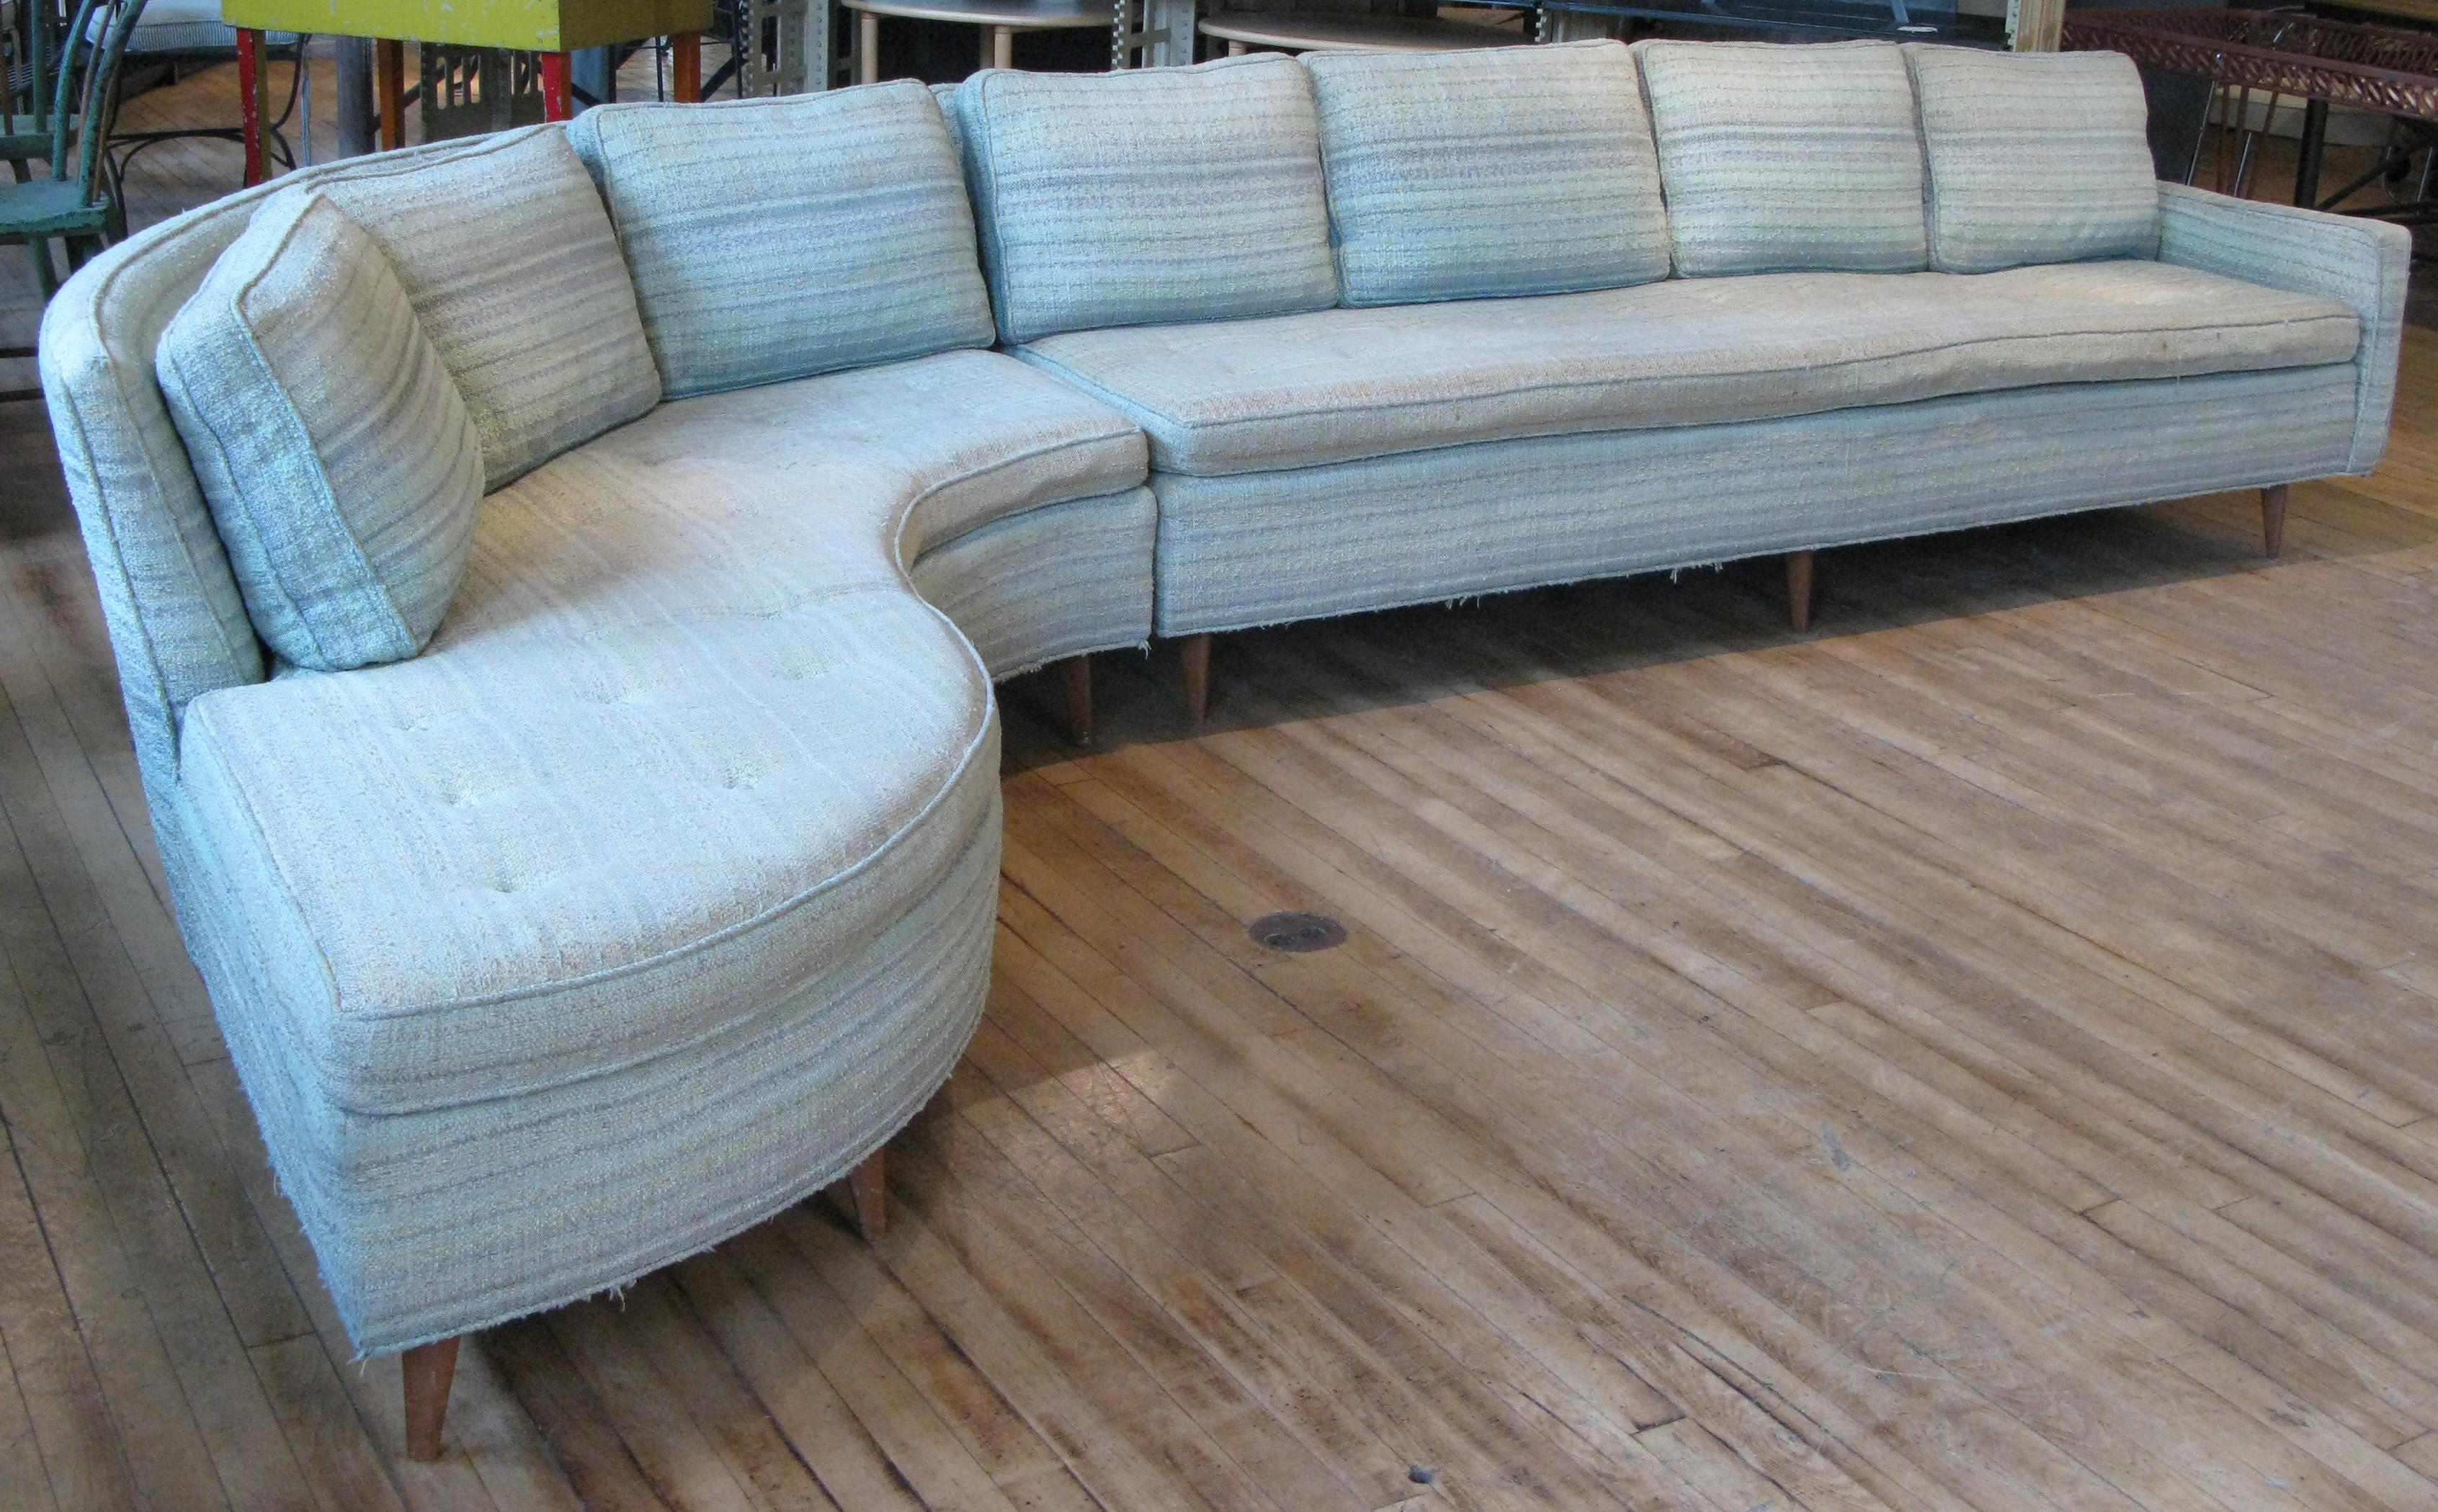 A beautiful and elegant 1950s curved sectional sofa designed by Erwin Lambeth. Composed of a straight section with a single arm, and a curved corner section with and extended seat. Beautiful design and very well made with solid mahogany legs and